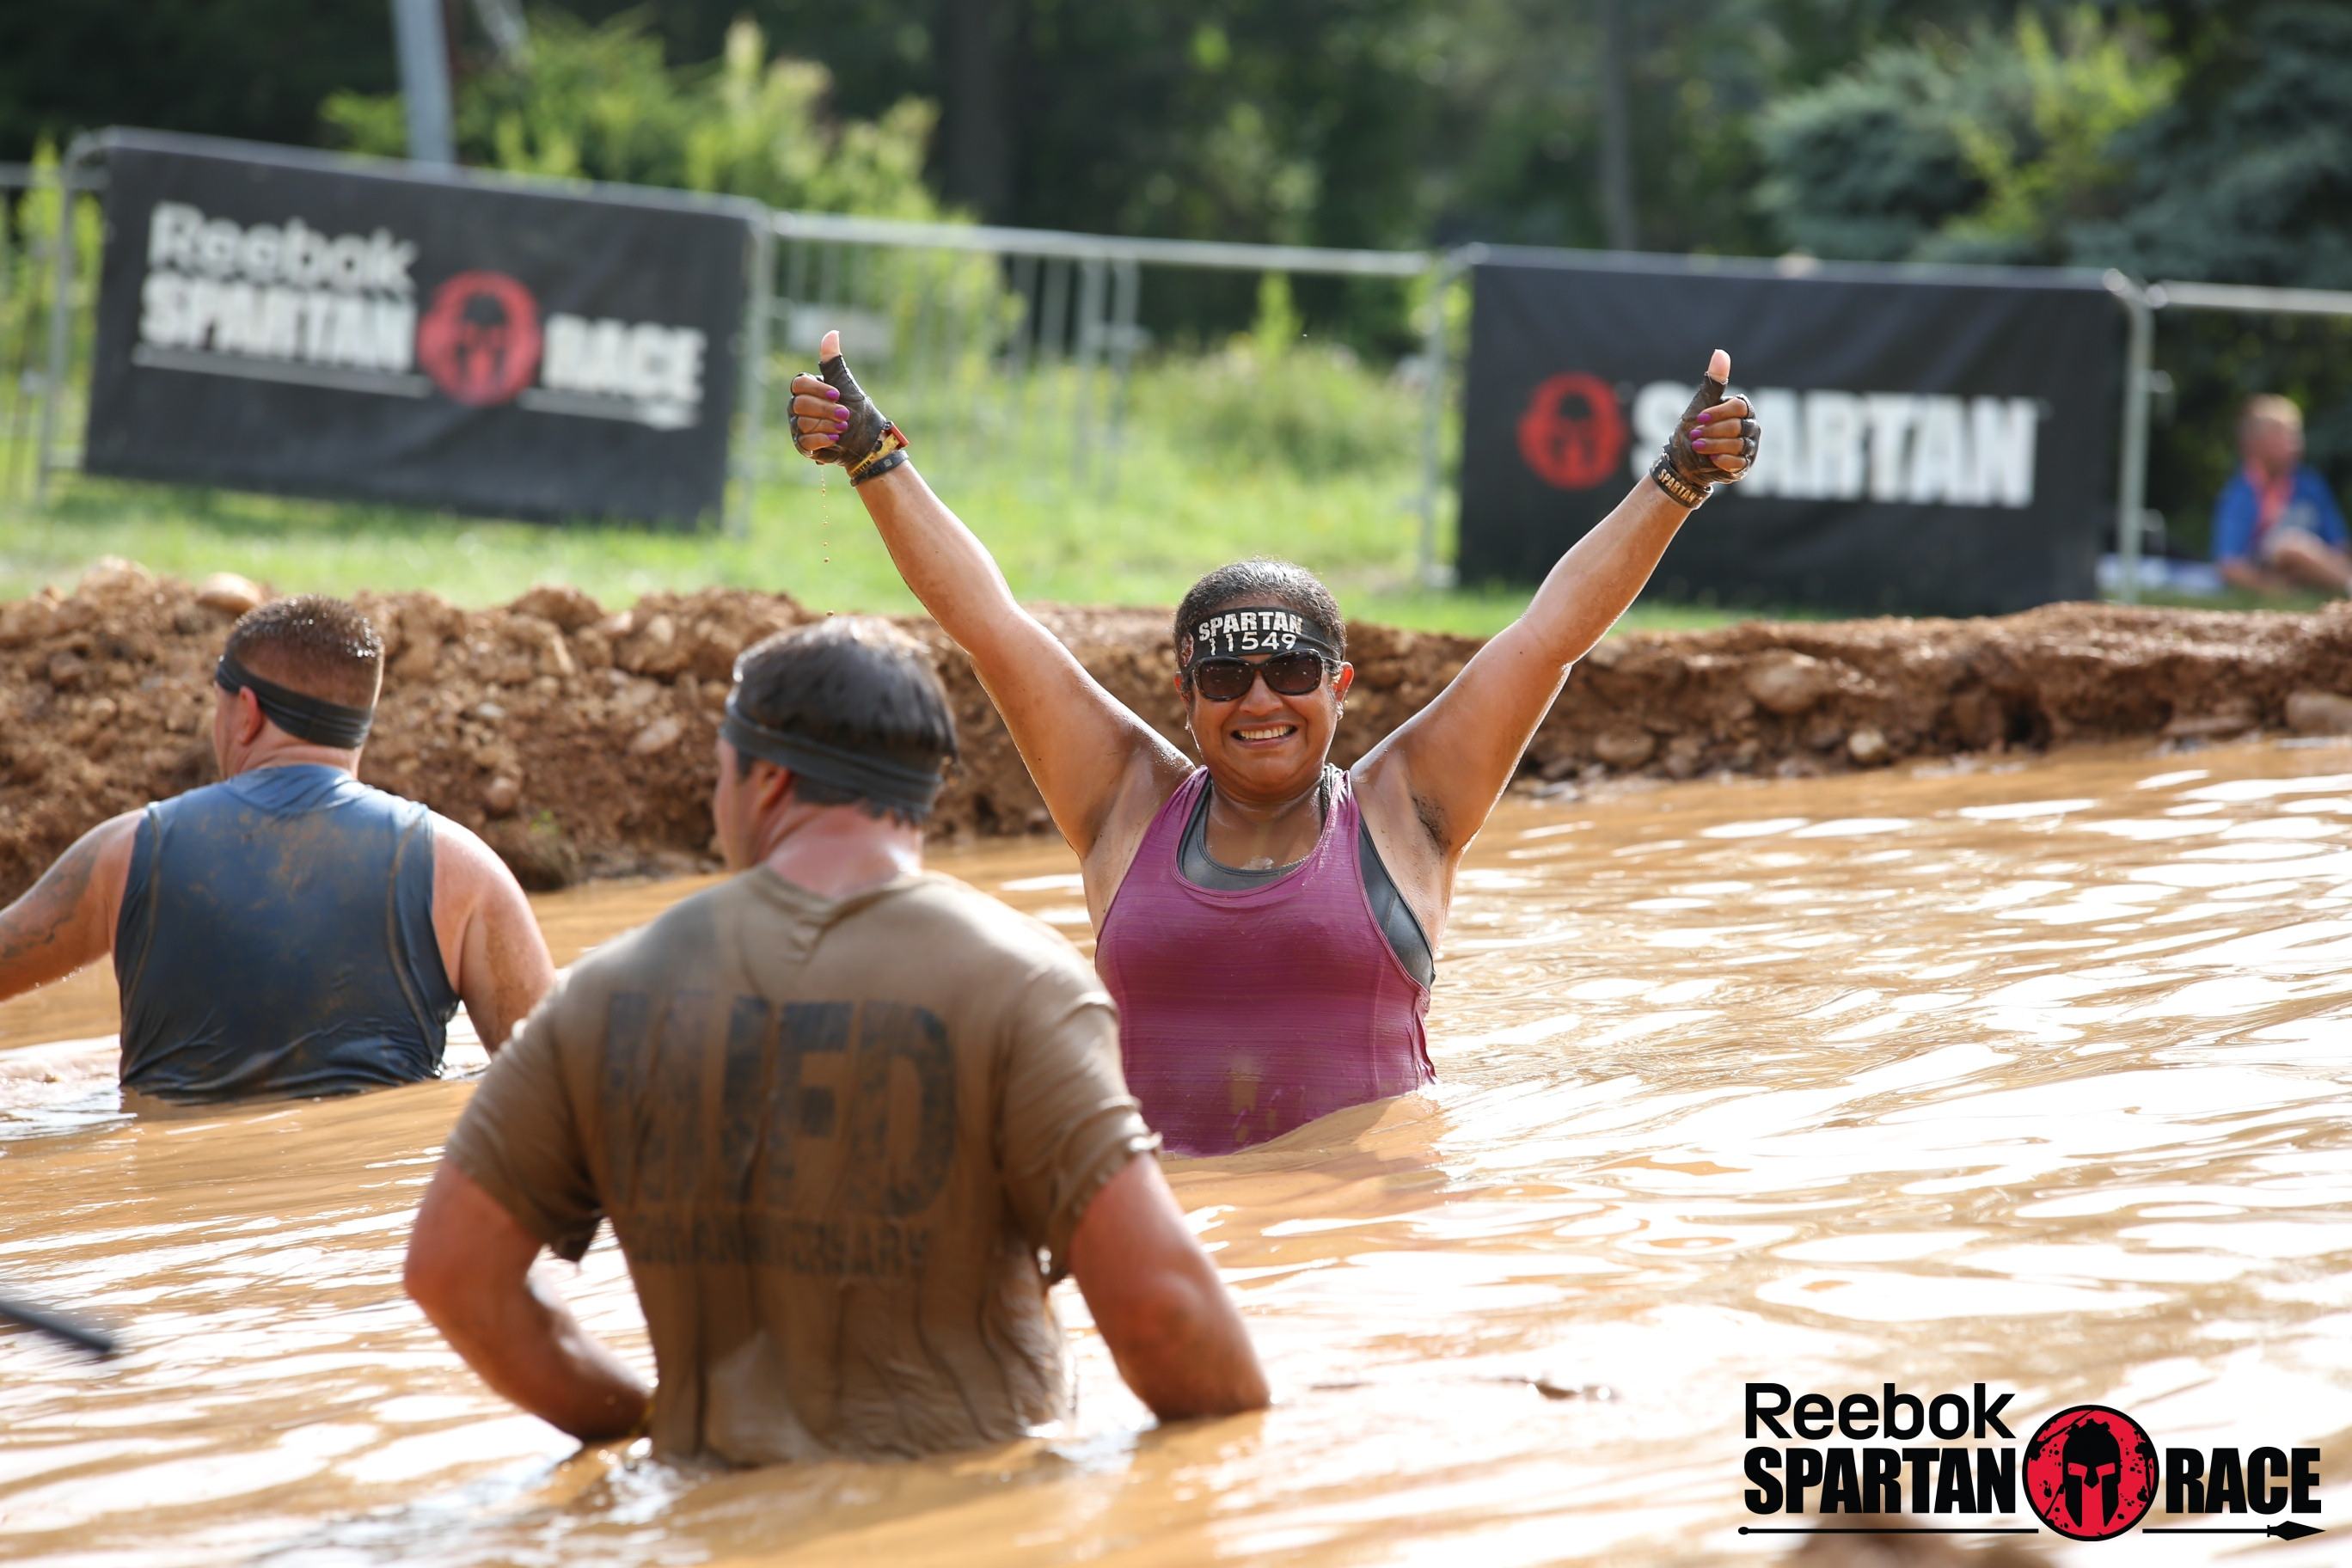 USANA Associate Turns Spartan Race Obstacles Into Victories